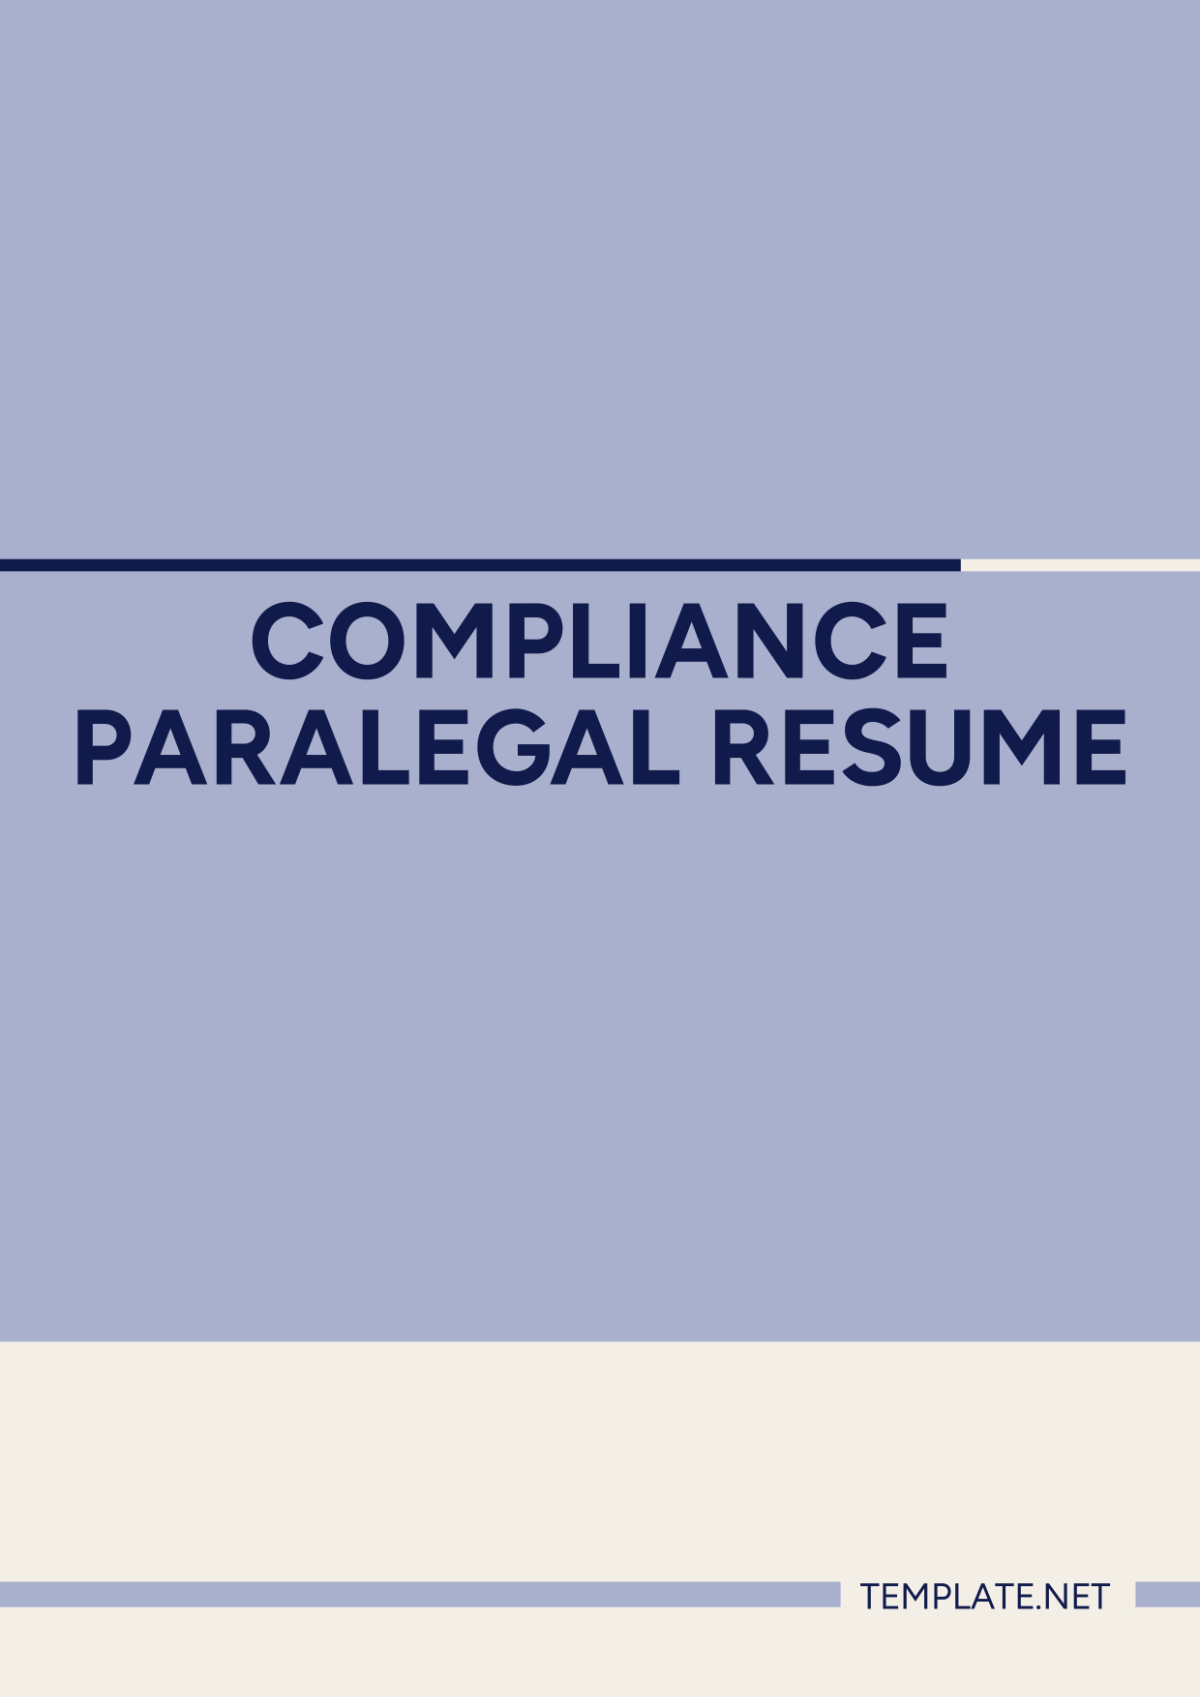 Compliance Paralegal Resume Template